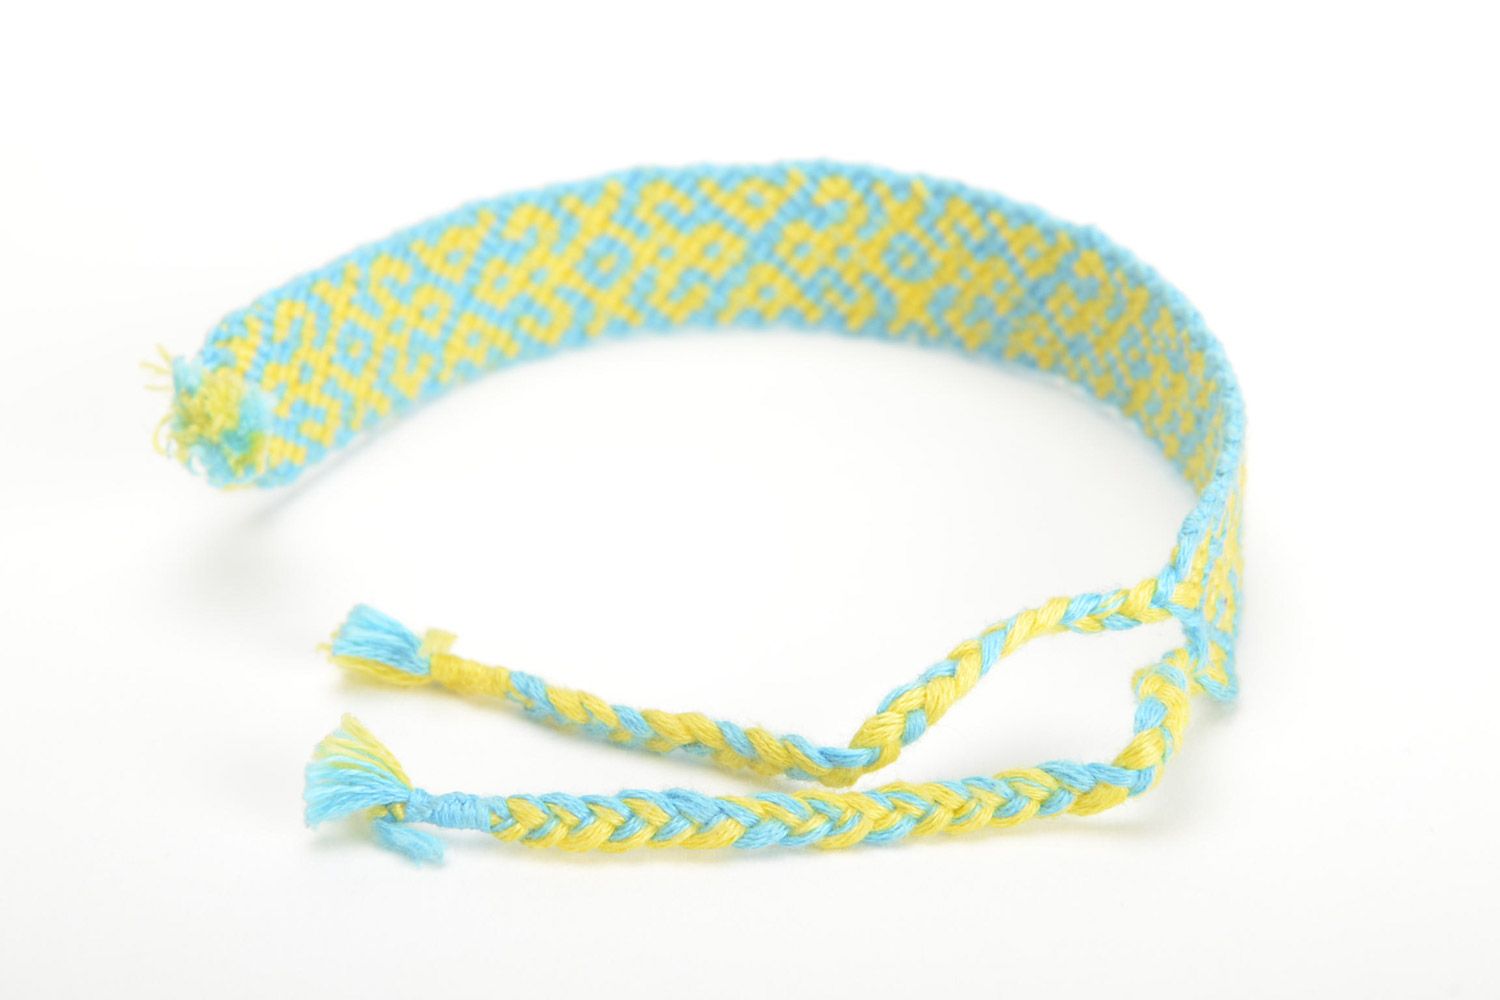 Handmade friendship wrist bracelet woven of blue and yellow threads with ties photo 3